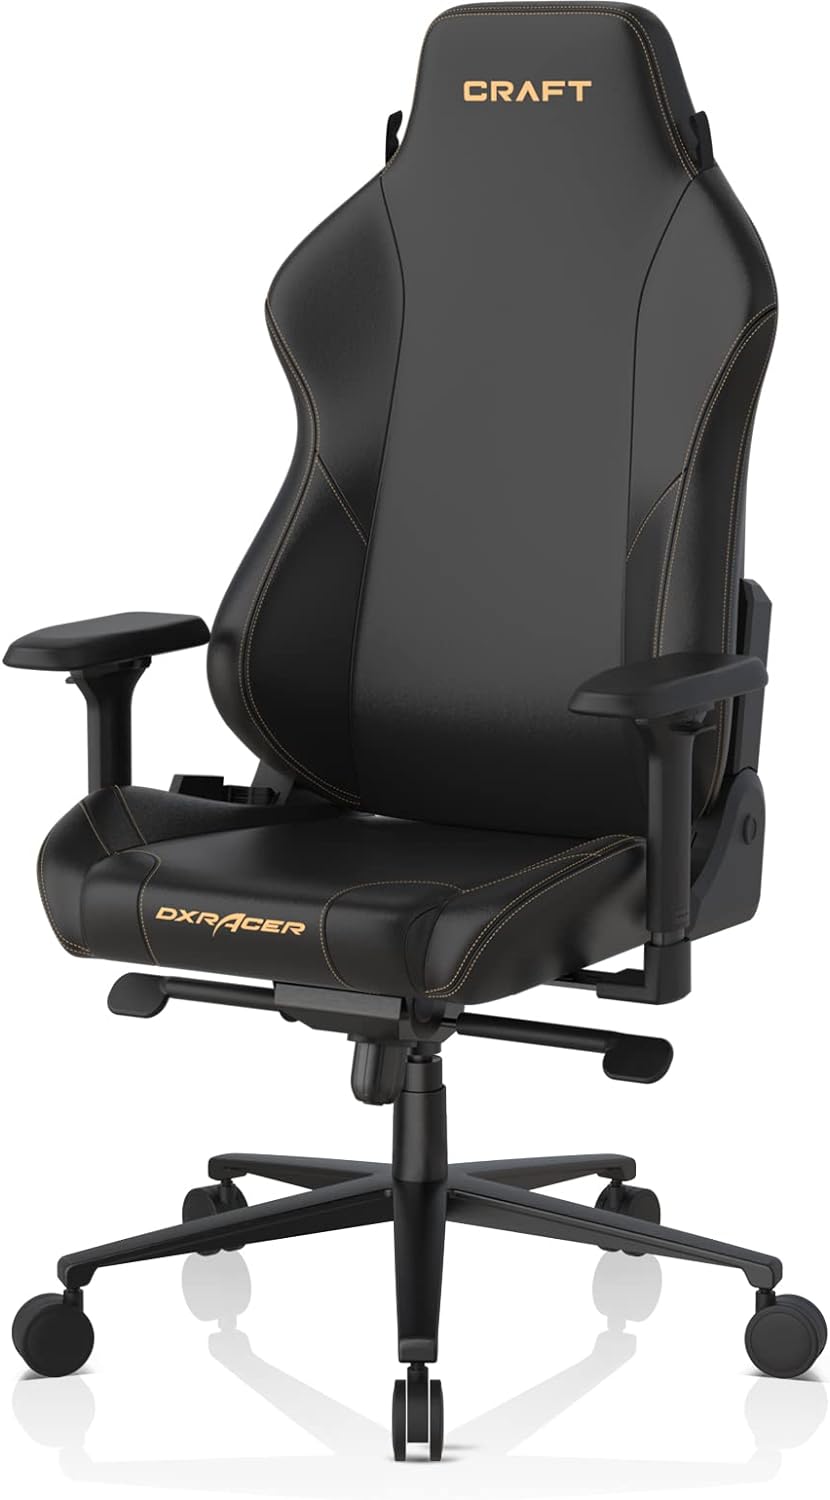 Craft Gaming Chair in Pure Black with intricate embroidery and premium quality design. 0810027590732